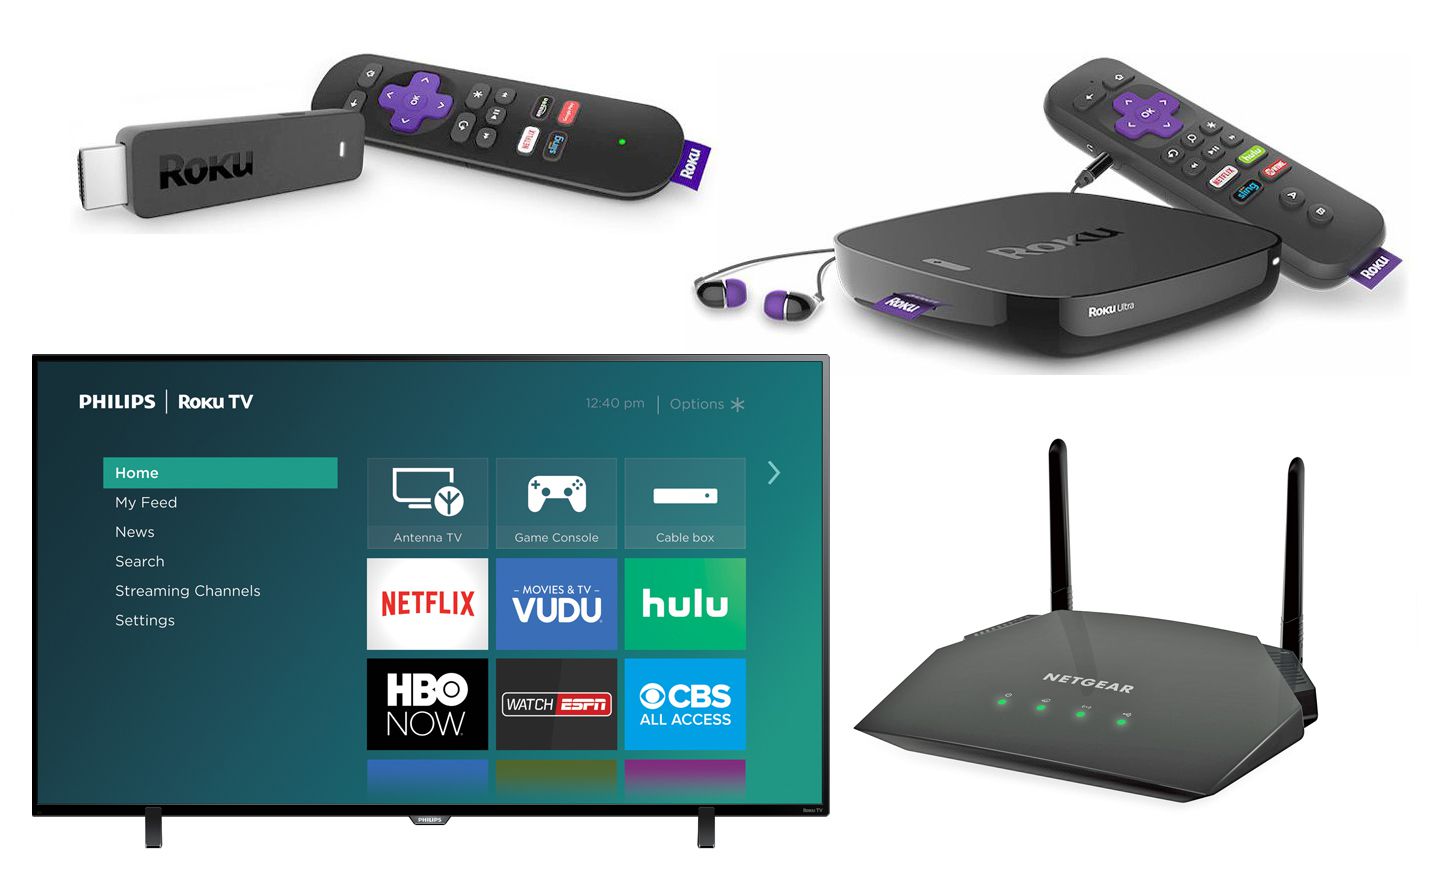 How to Connect Your Roku to Wi